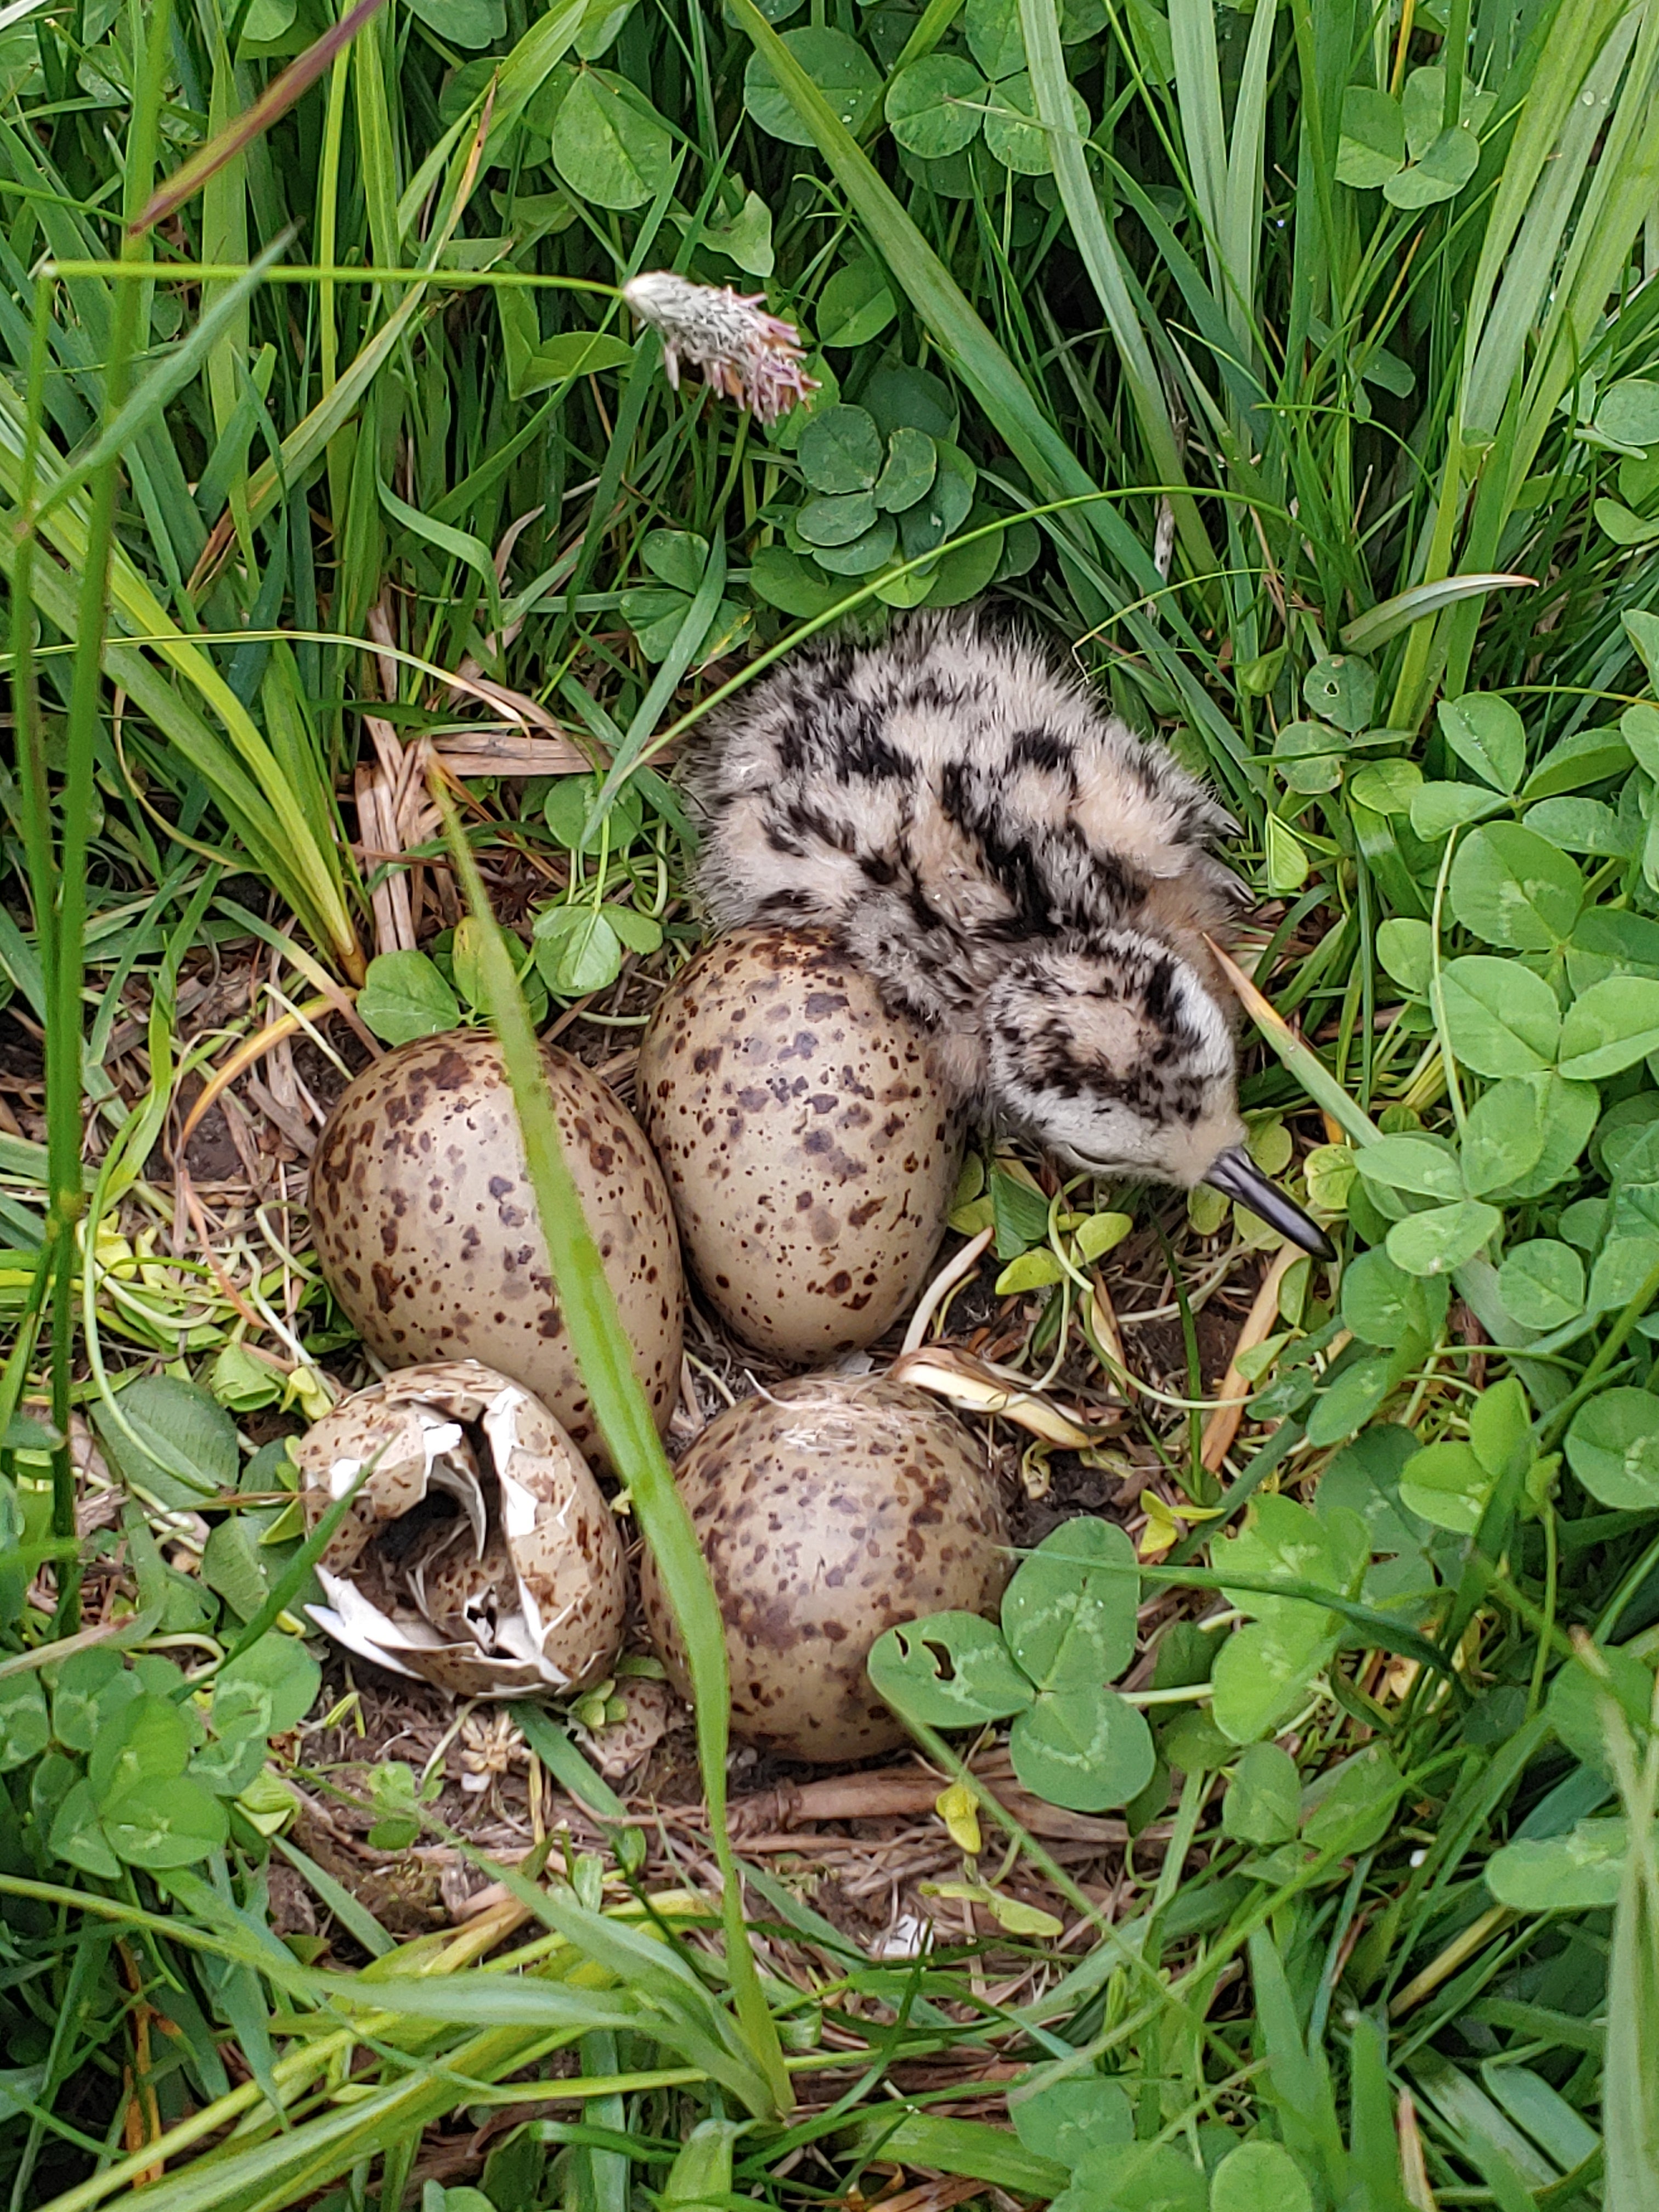 image shows small brown and white baby bird in a ground nest along side 3 unhatched green speckled eggs and an empty egg shell camofluaged in green grass